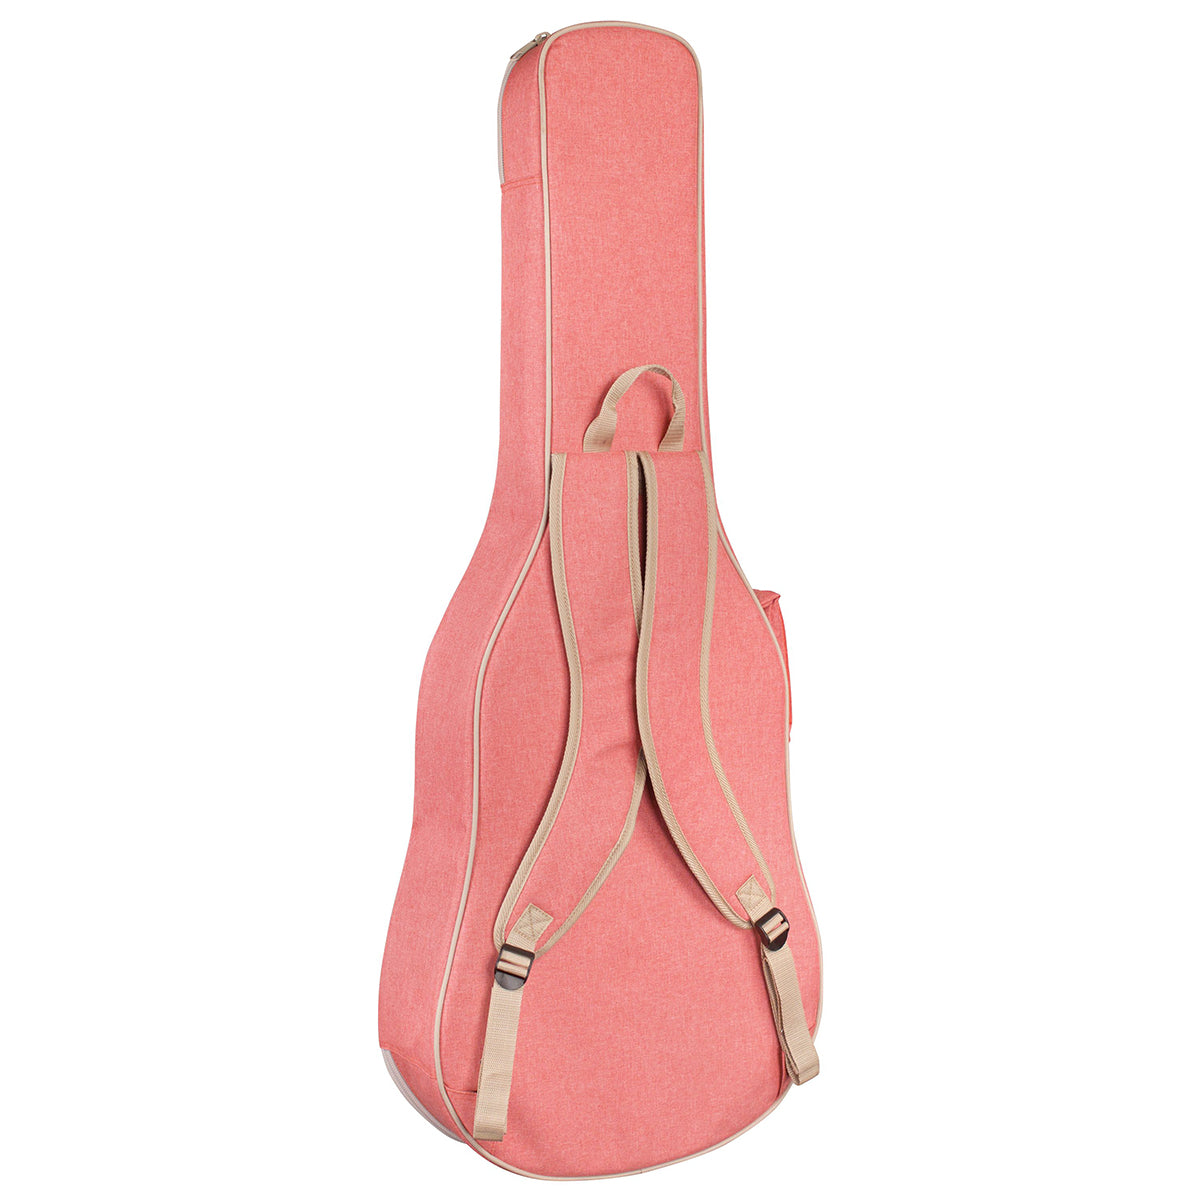 Cordoba Protege C1 Matiz Classical Guitar in Coral with Color-Matching Nylon Gig Bag